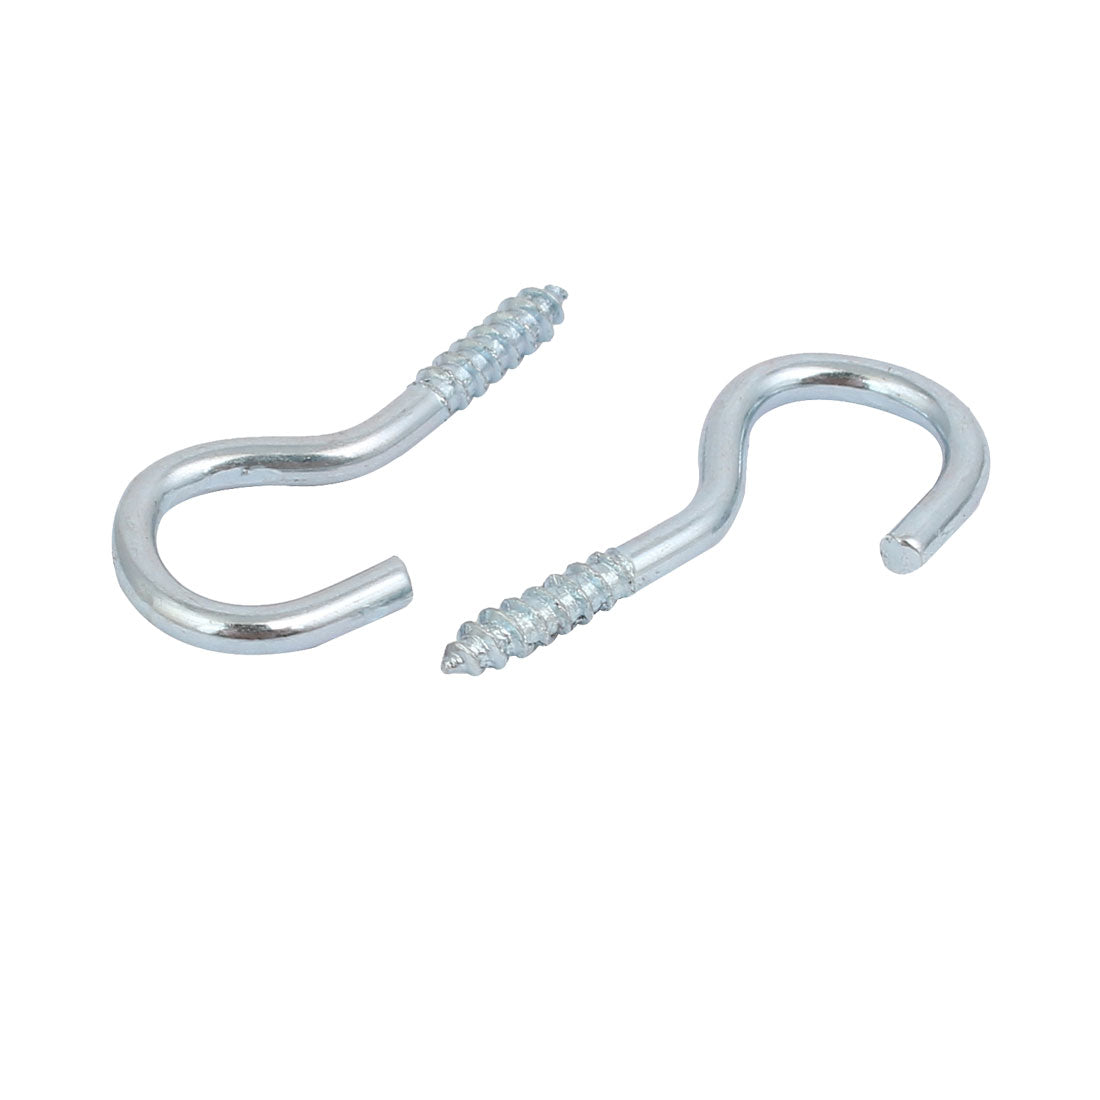 uxcell Uxcell 5.3mm Opening Width 25mm Length Zinc Plated Self-Tapping Cup Screw Hook 50pcs